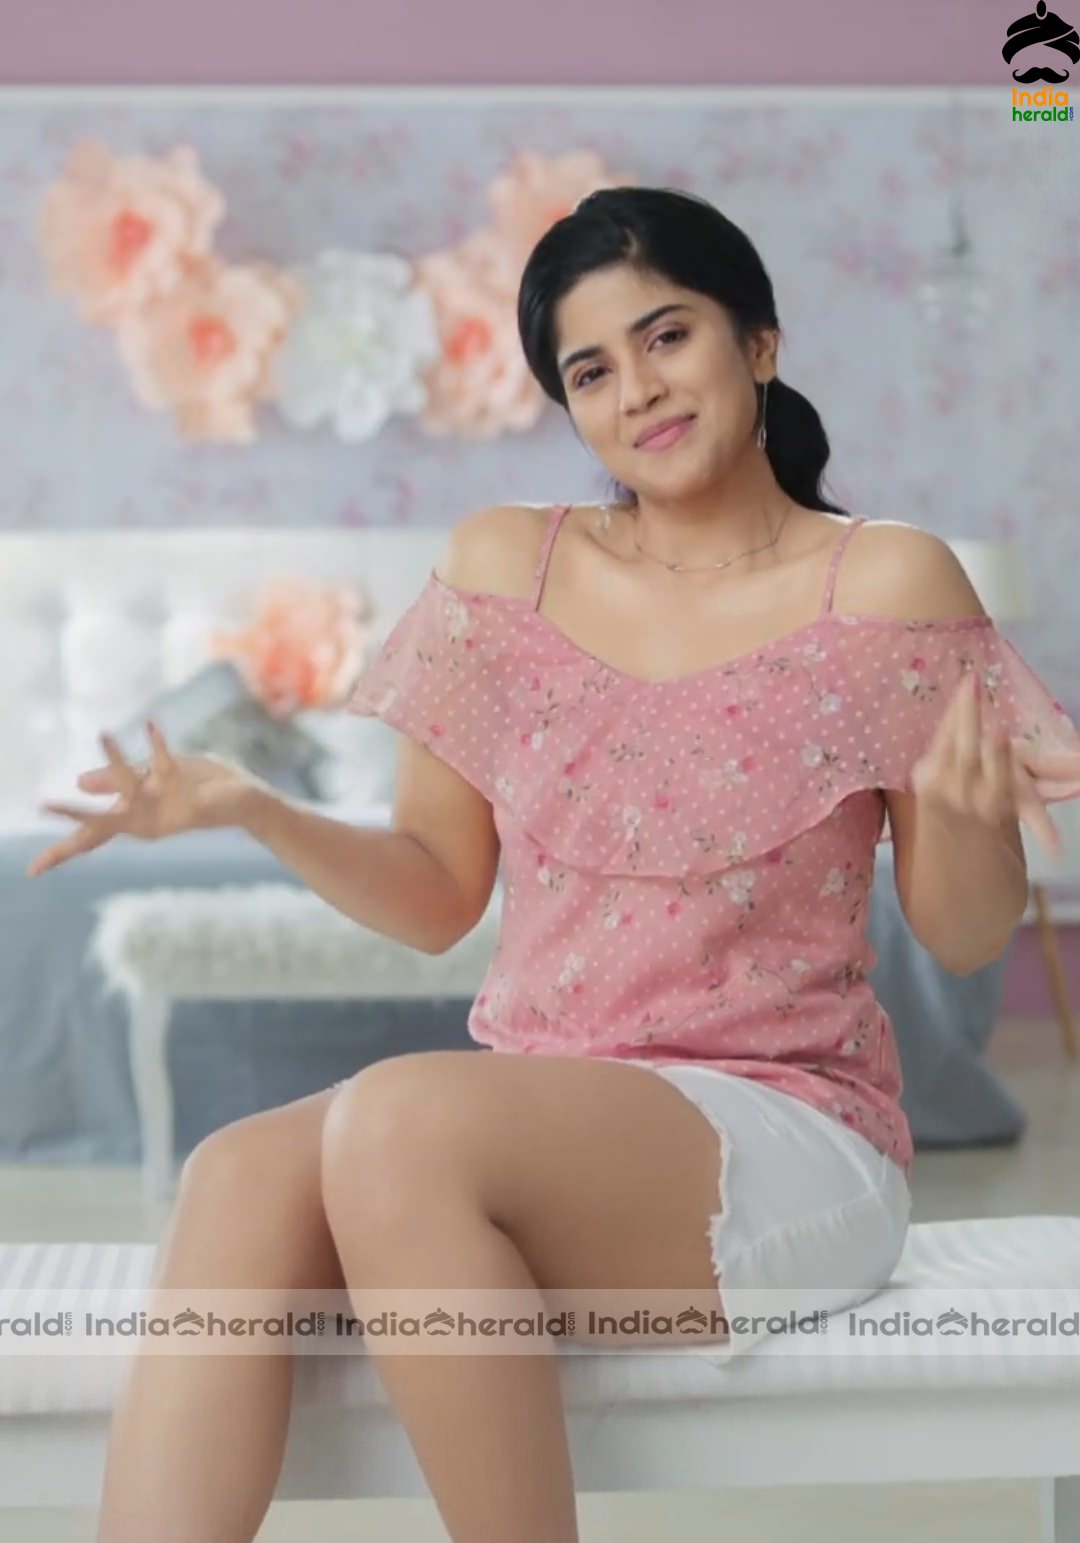 Megha Akash Latest Clicks for a Hair Removal Advertisement